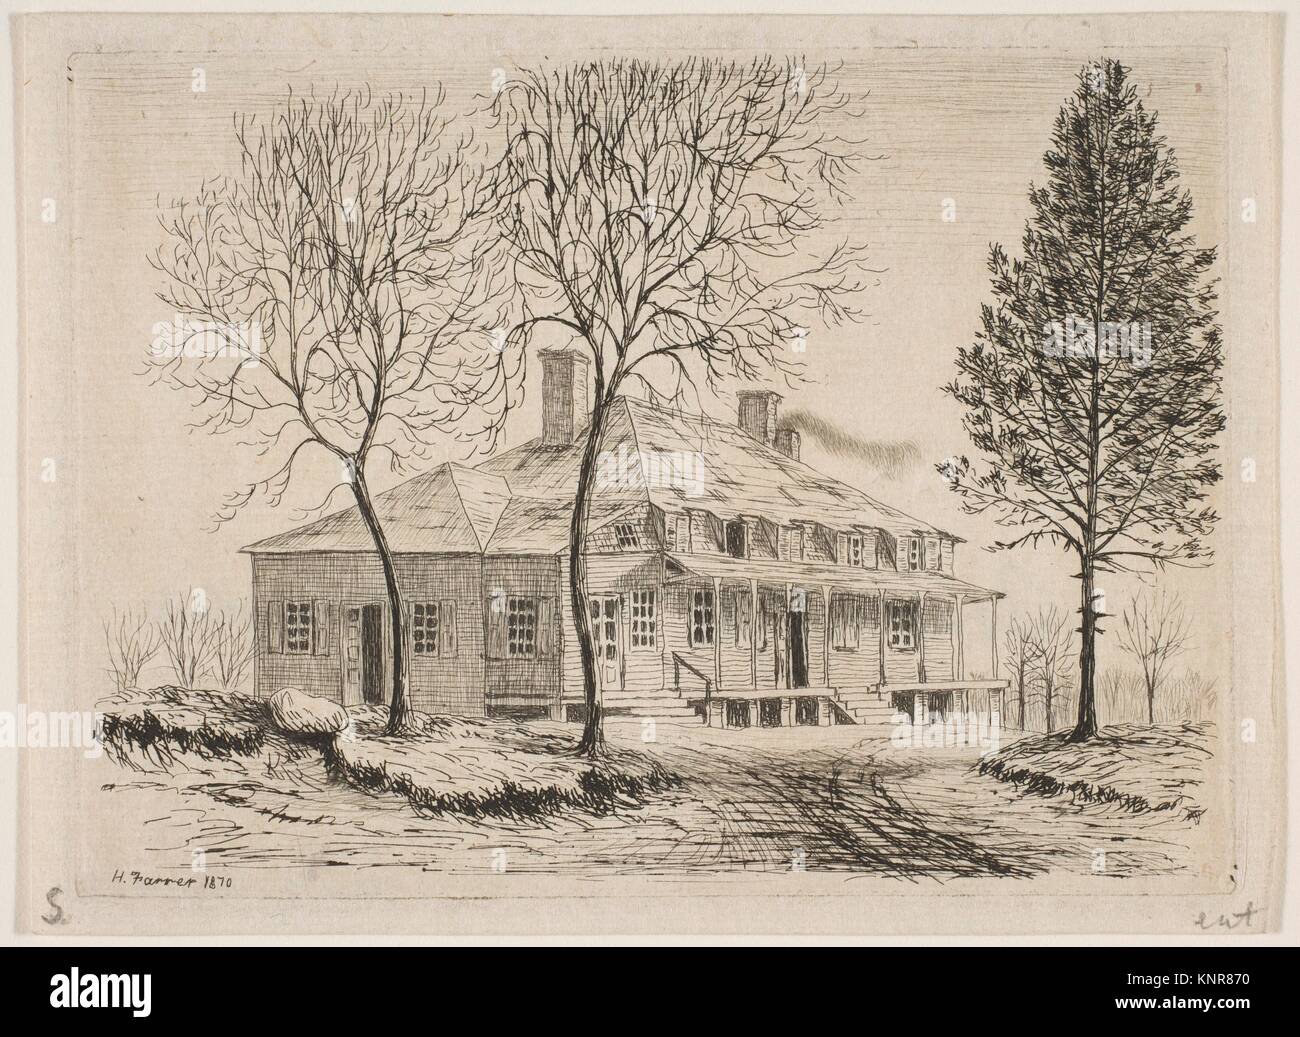 Somerindyck House (from Scenes of Old New York). Artist: Henry Farrer (American, London 1844-1903 New York); Date: 1870; Medium: Etching, trial Stock Photo